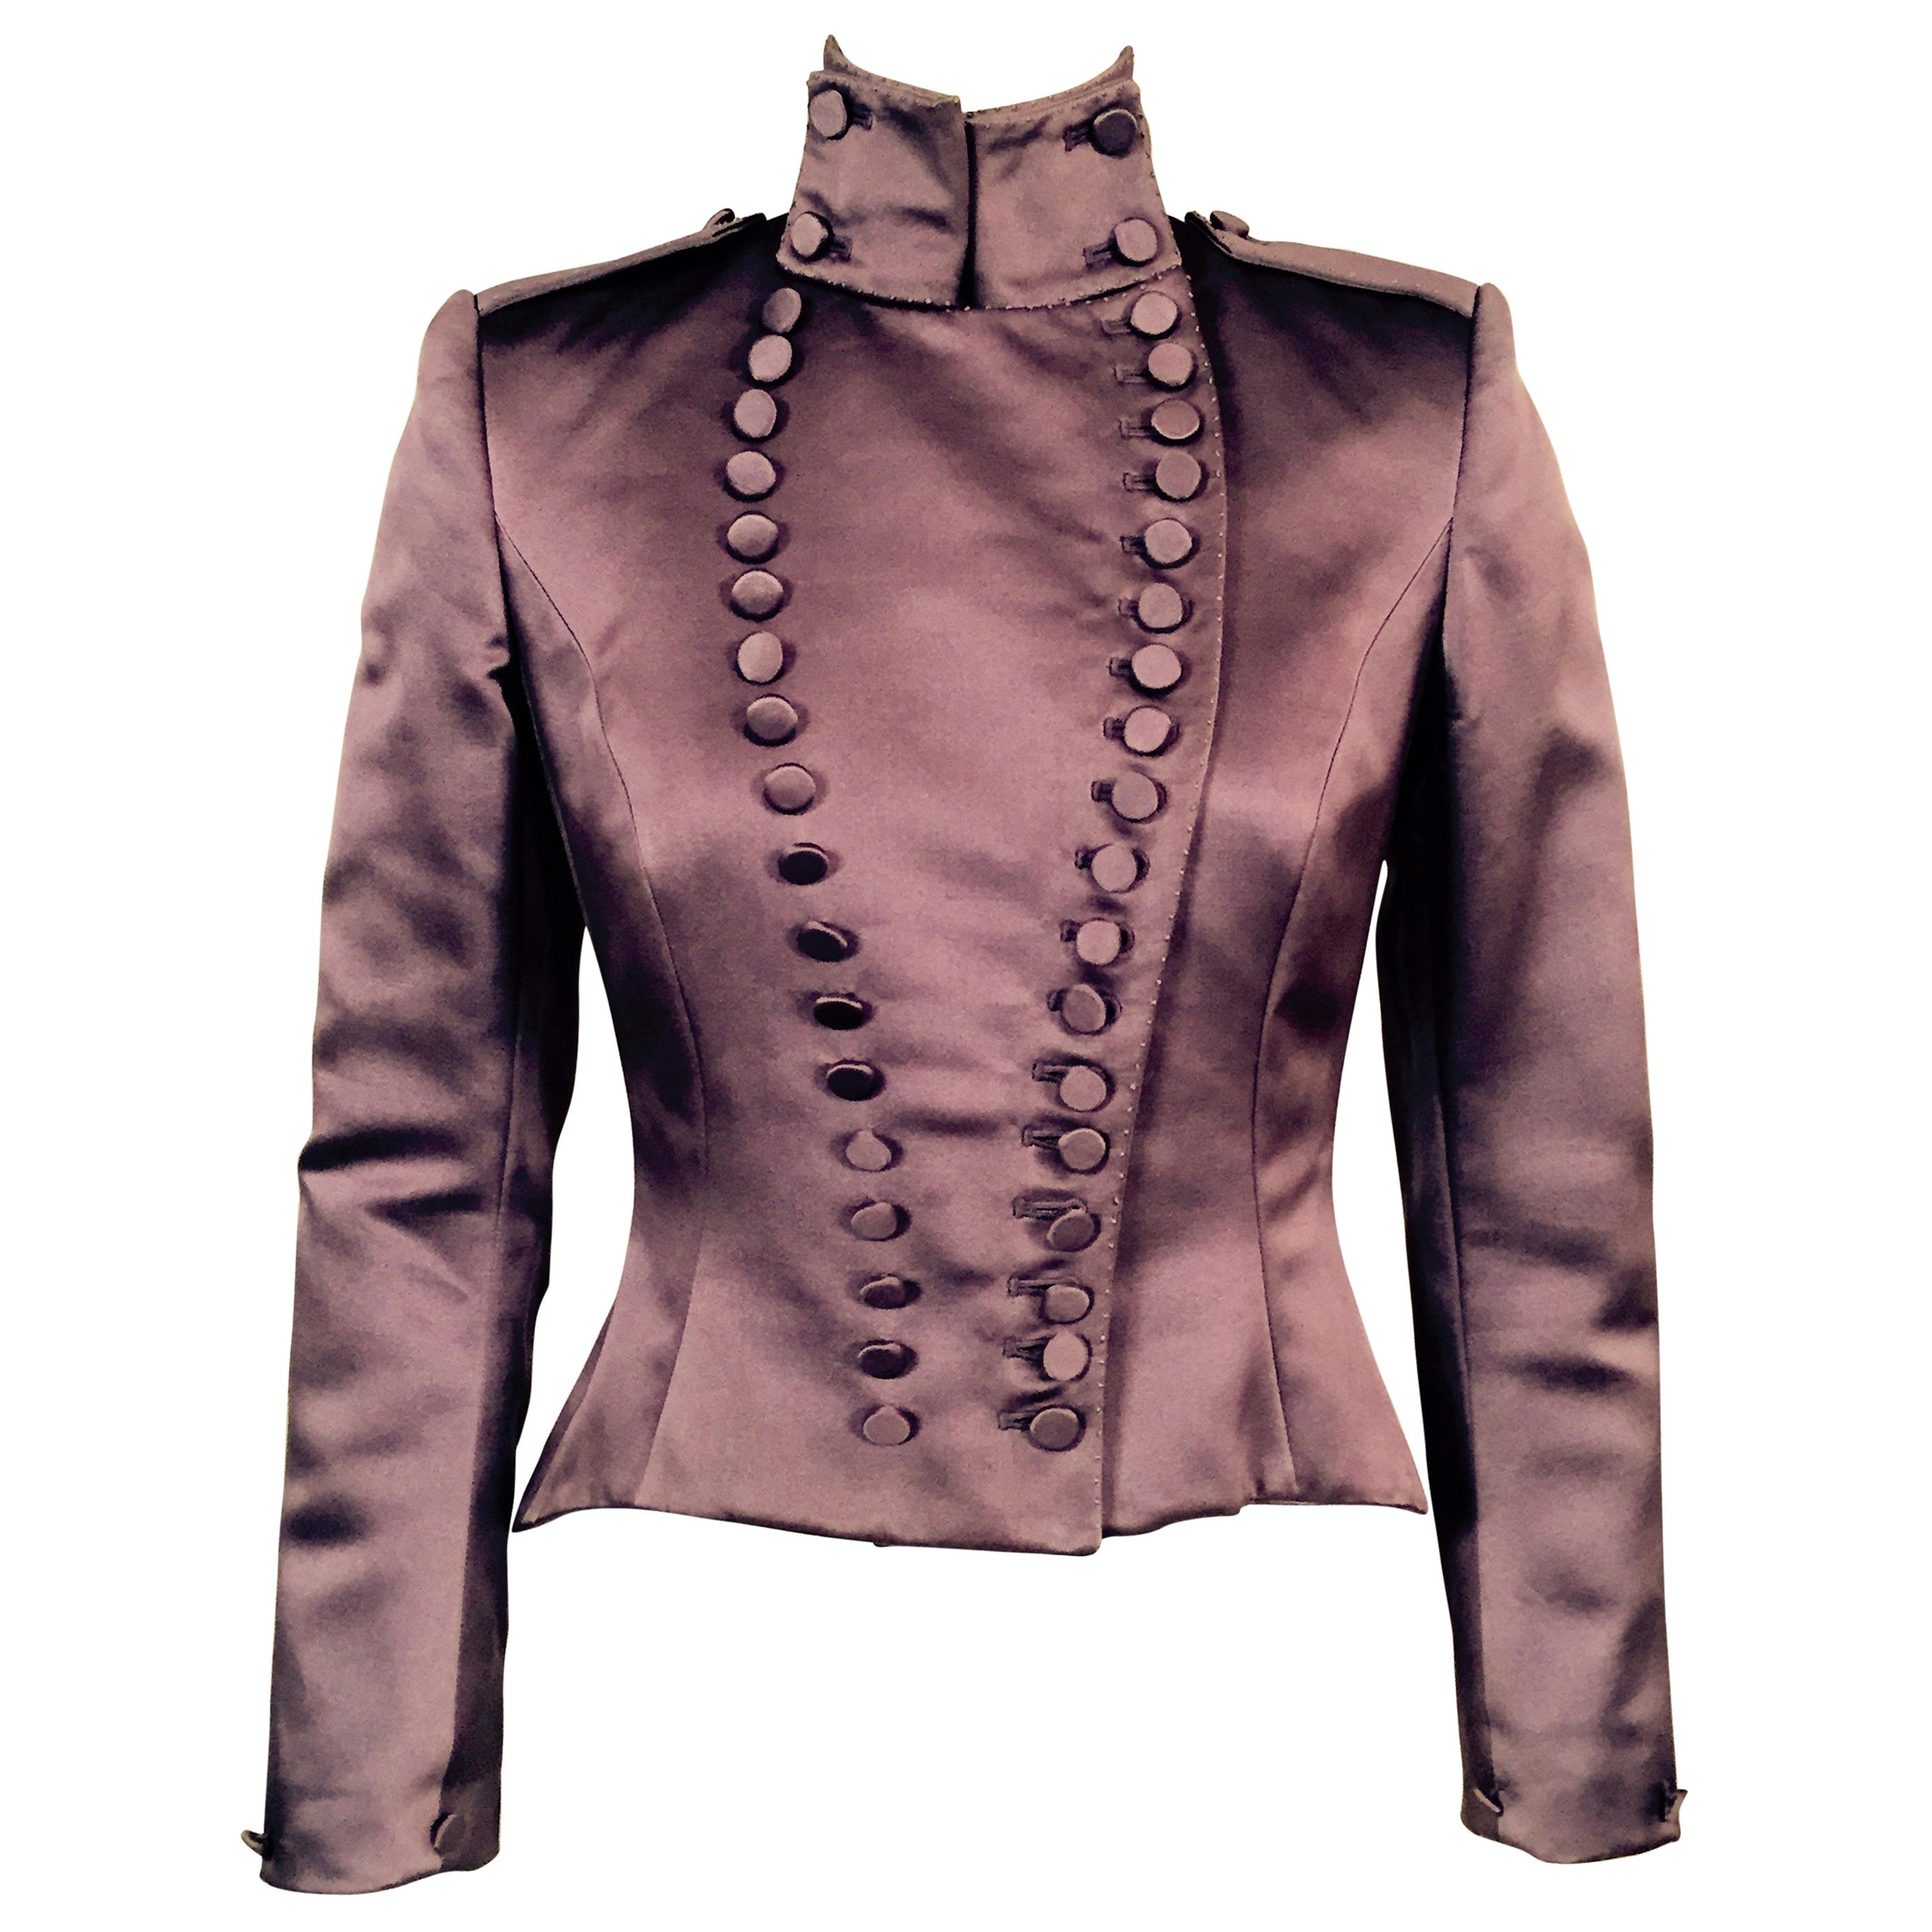 Mauve Silk Satin Victorian Style Jacket Designed by Maggie Norris Couture